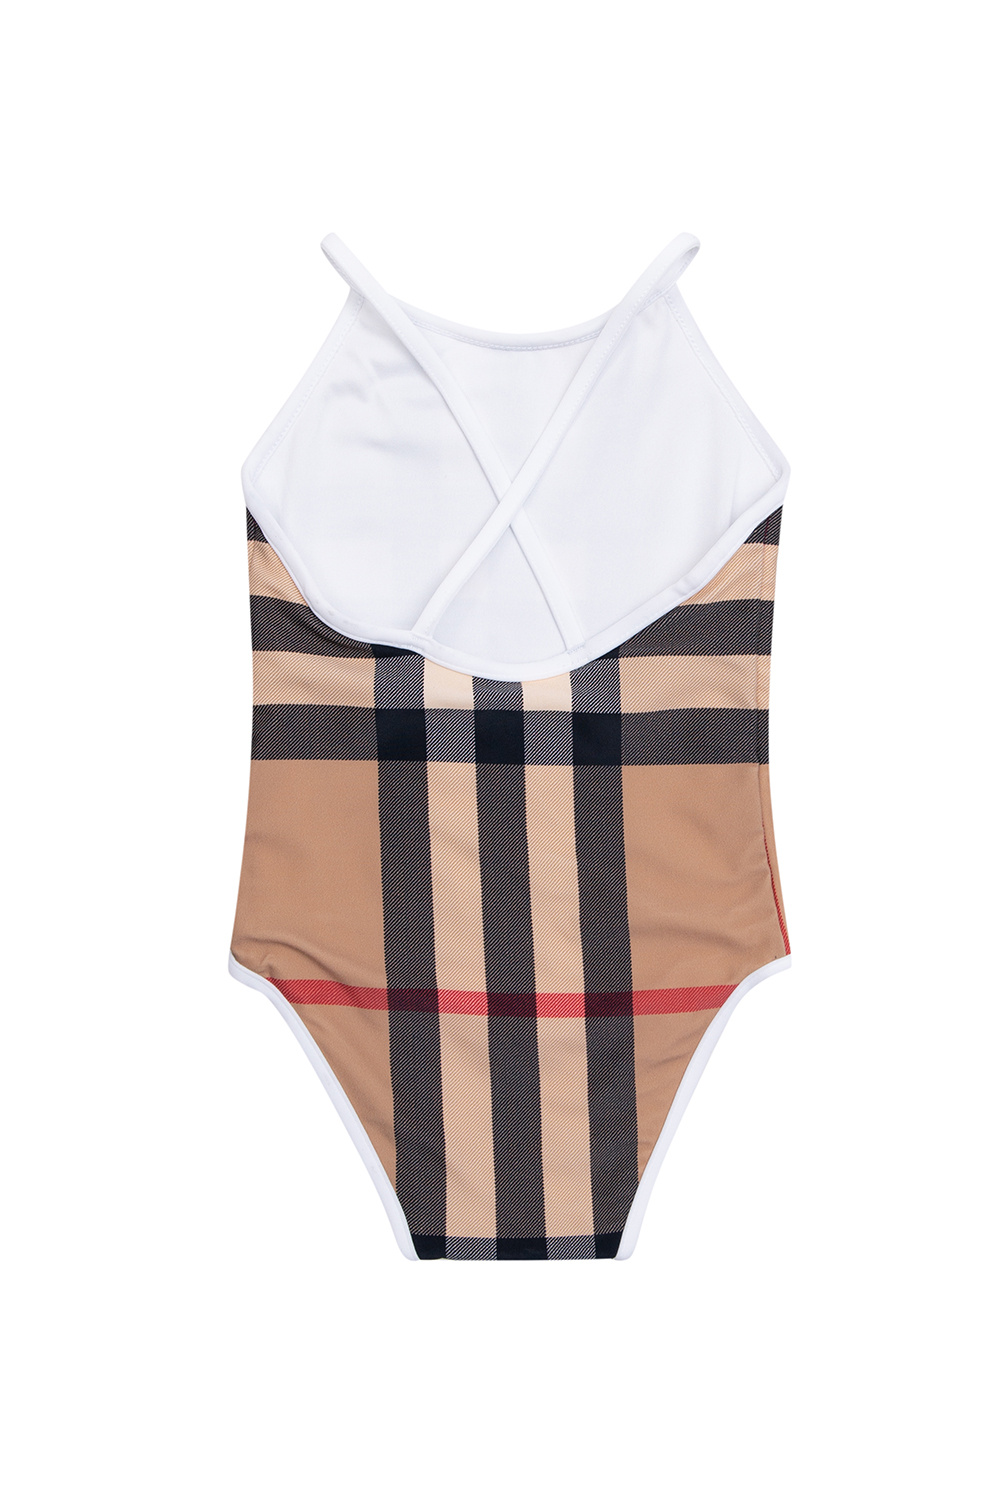 burberry Quilted Kids One-piece swimsuit